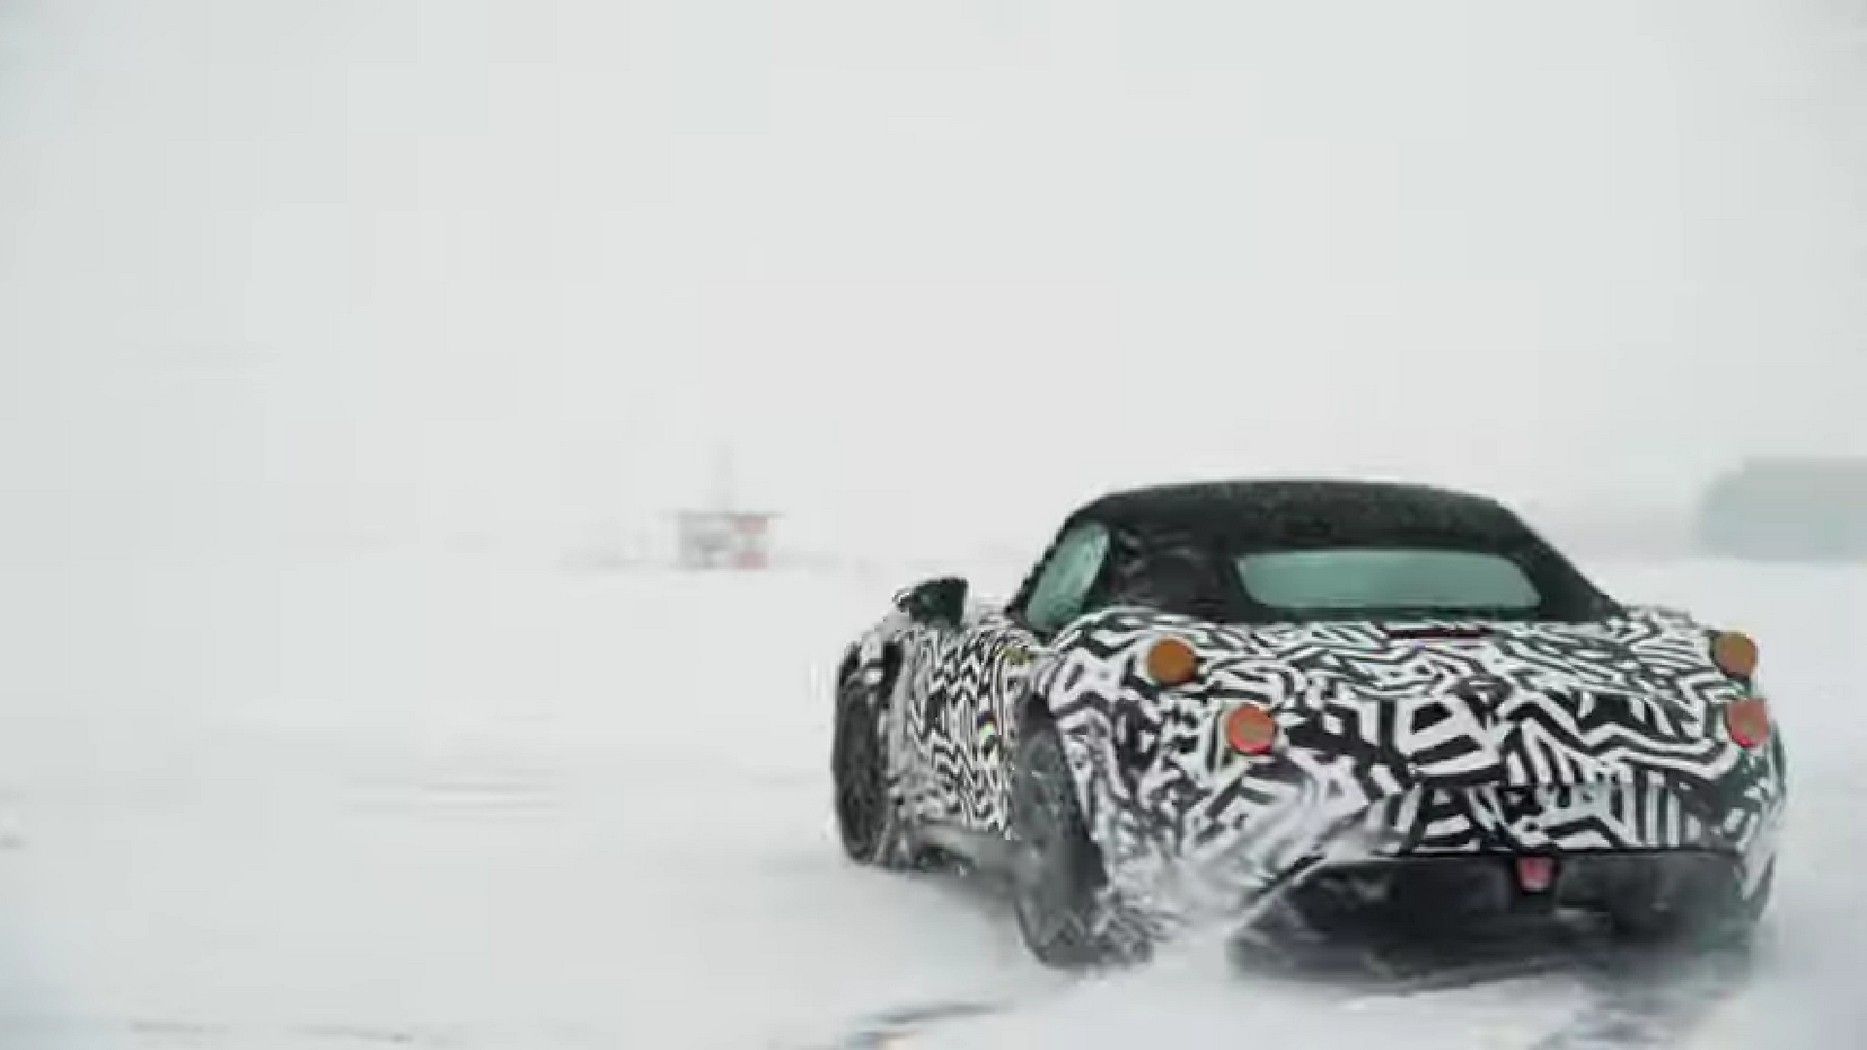 Wiesmann Project Thunderball tests on snowy track